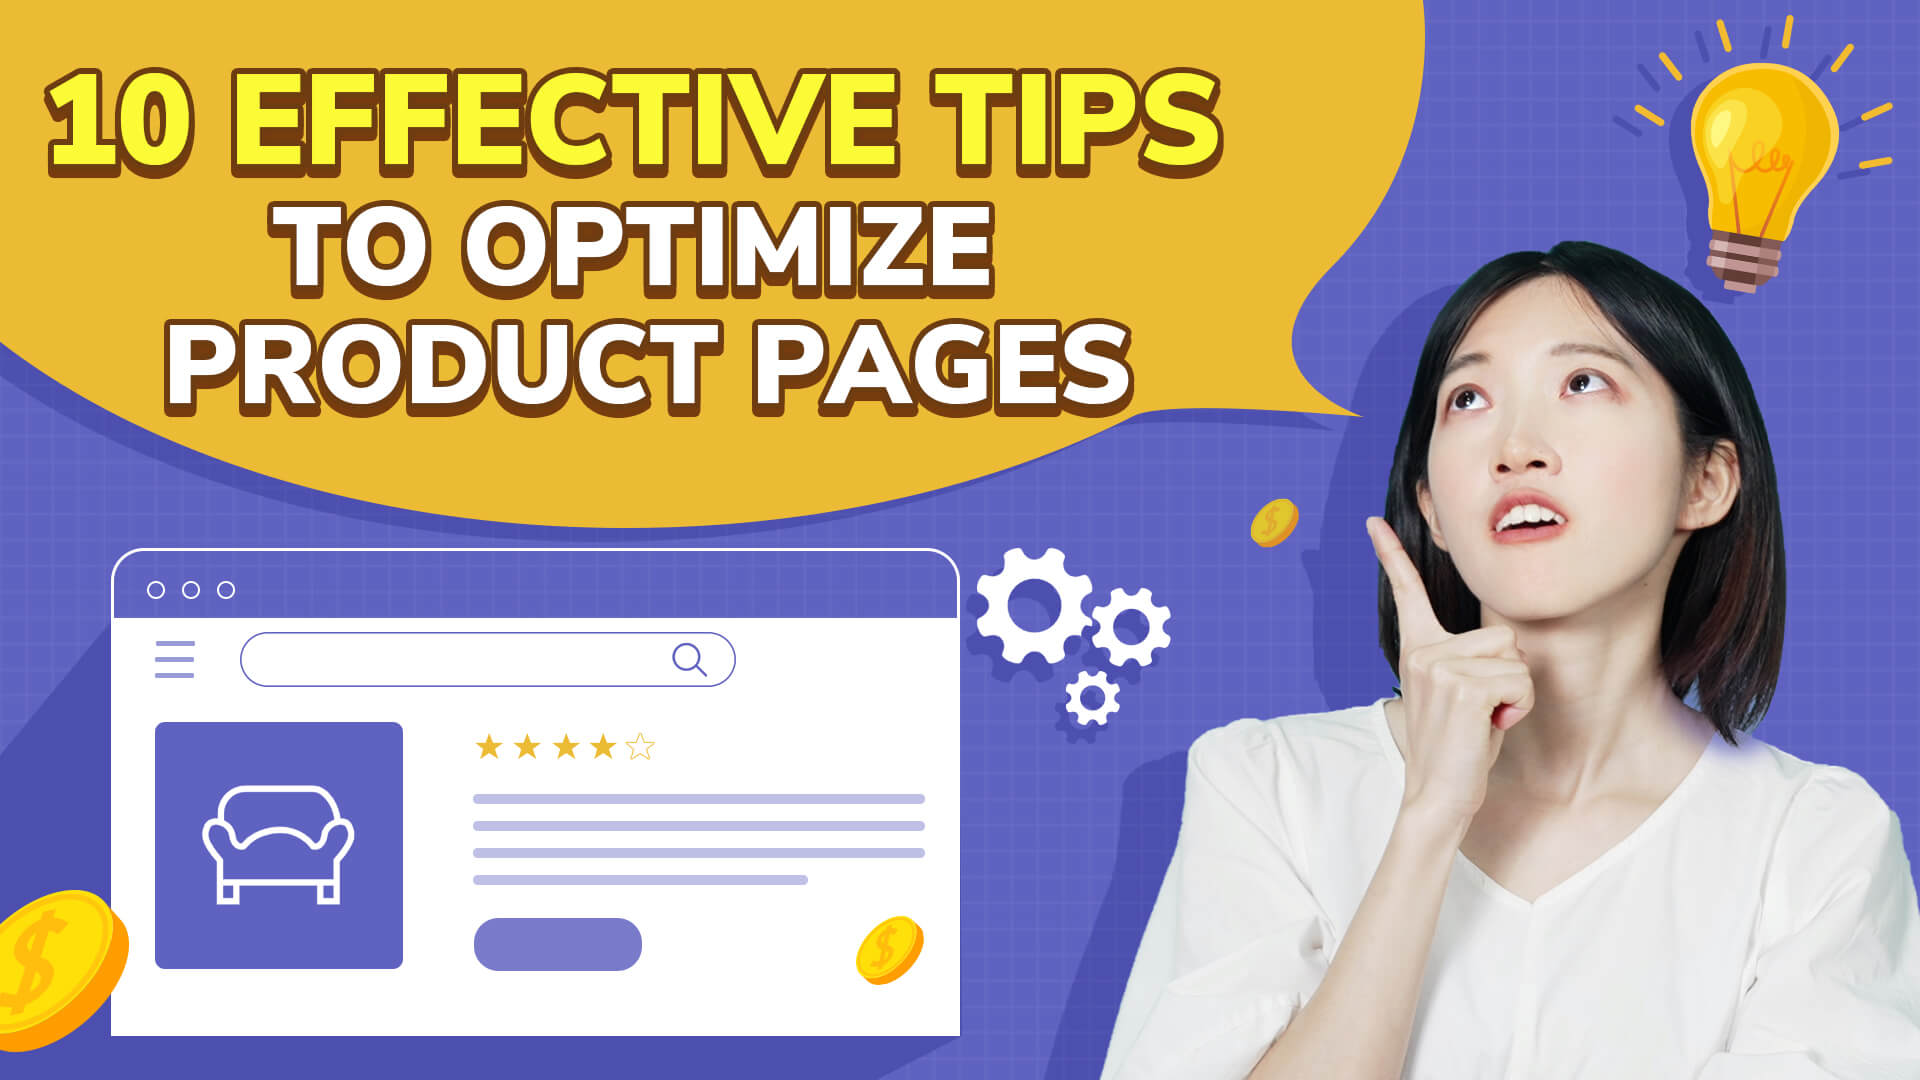 10 Effective Tips to Optimize Product Pages